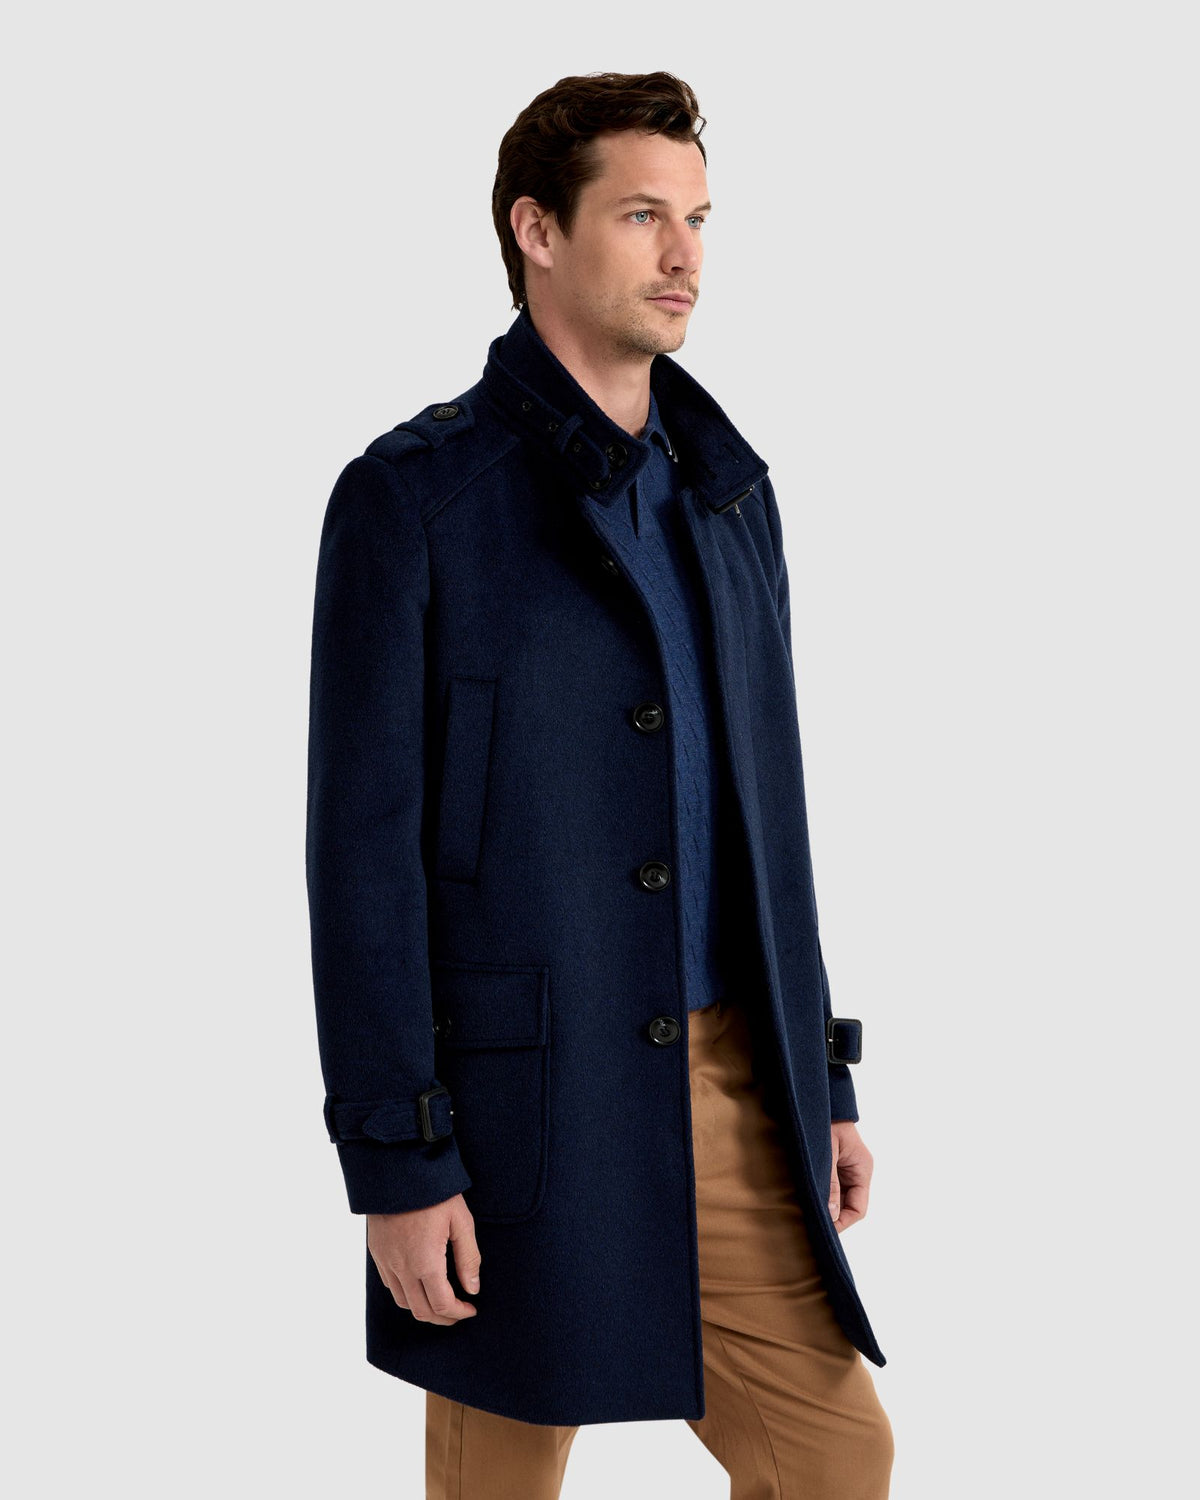 ROGER WOOL RICH OVERCOAT MENS JACKETS AND COATS